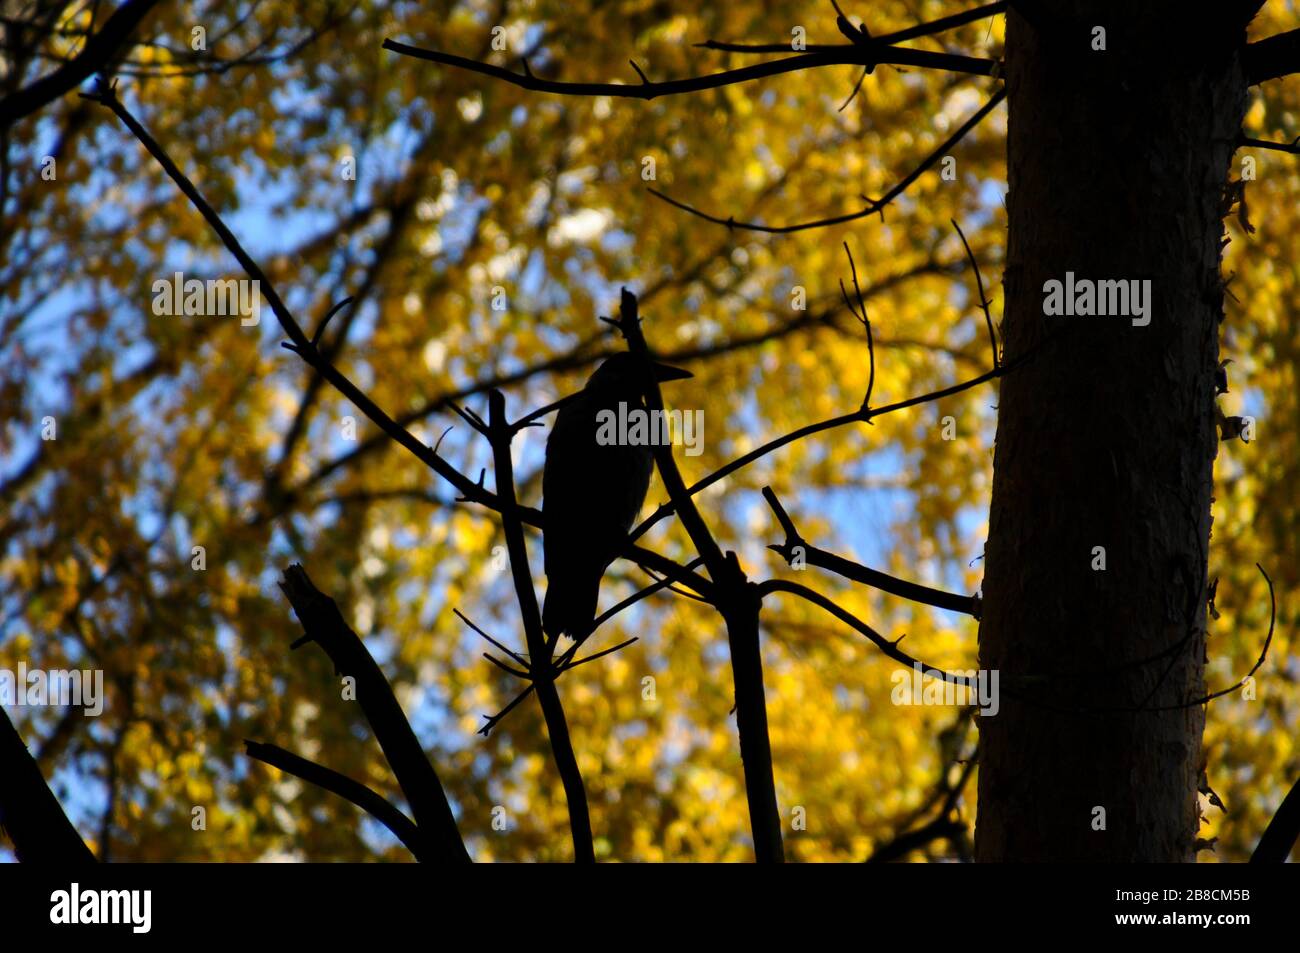 Silhouette of a crow sitting on a tree branch with sky and bright autumn leaves in the background. Stock Photo